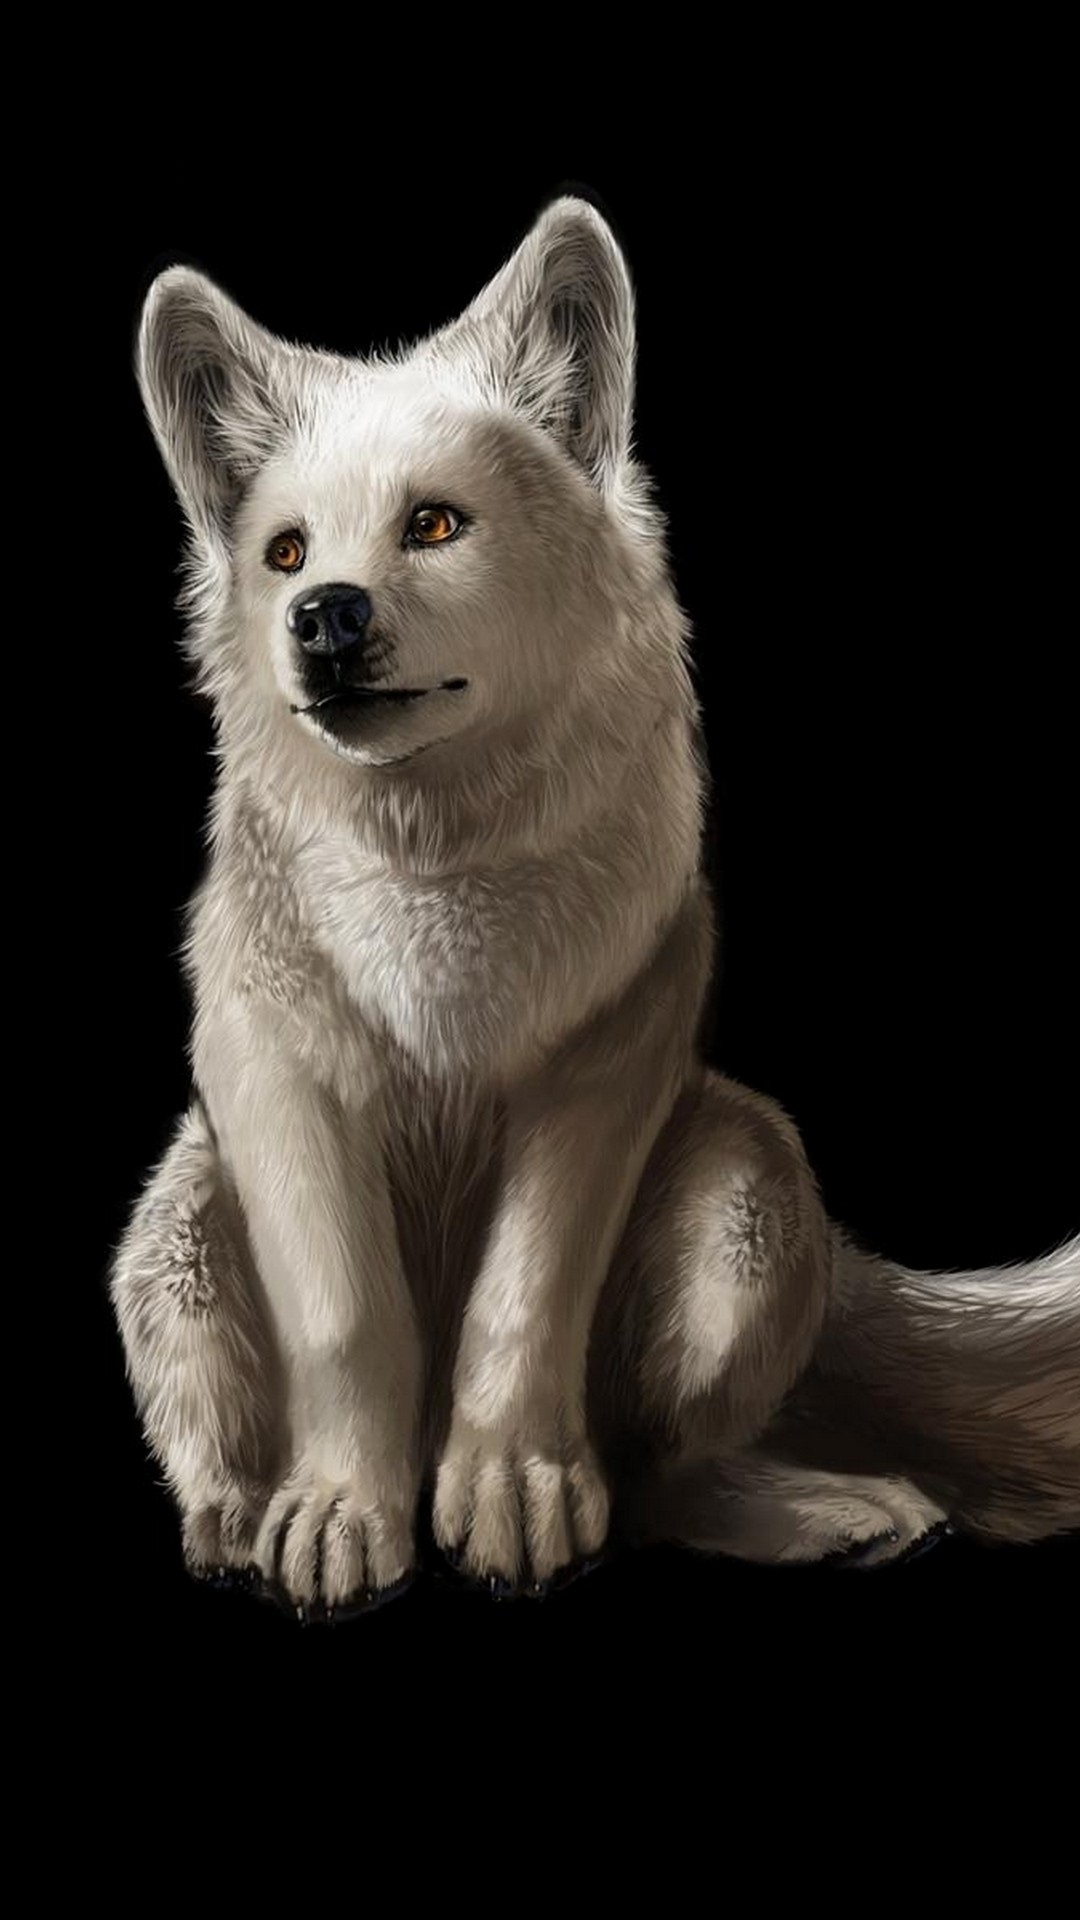 Cool Wolf Cell Phones Wallpaper with high-resolution 1080x1920 pixel. Download all Mobile Wallpapers and Use them as wallpapers for your iPhone, Tablet, iPad, Android and other mobile devices